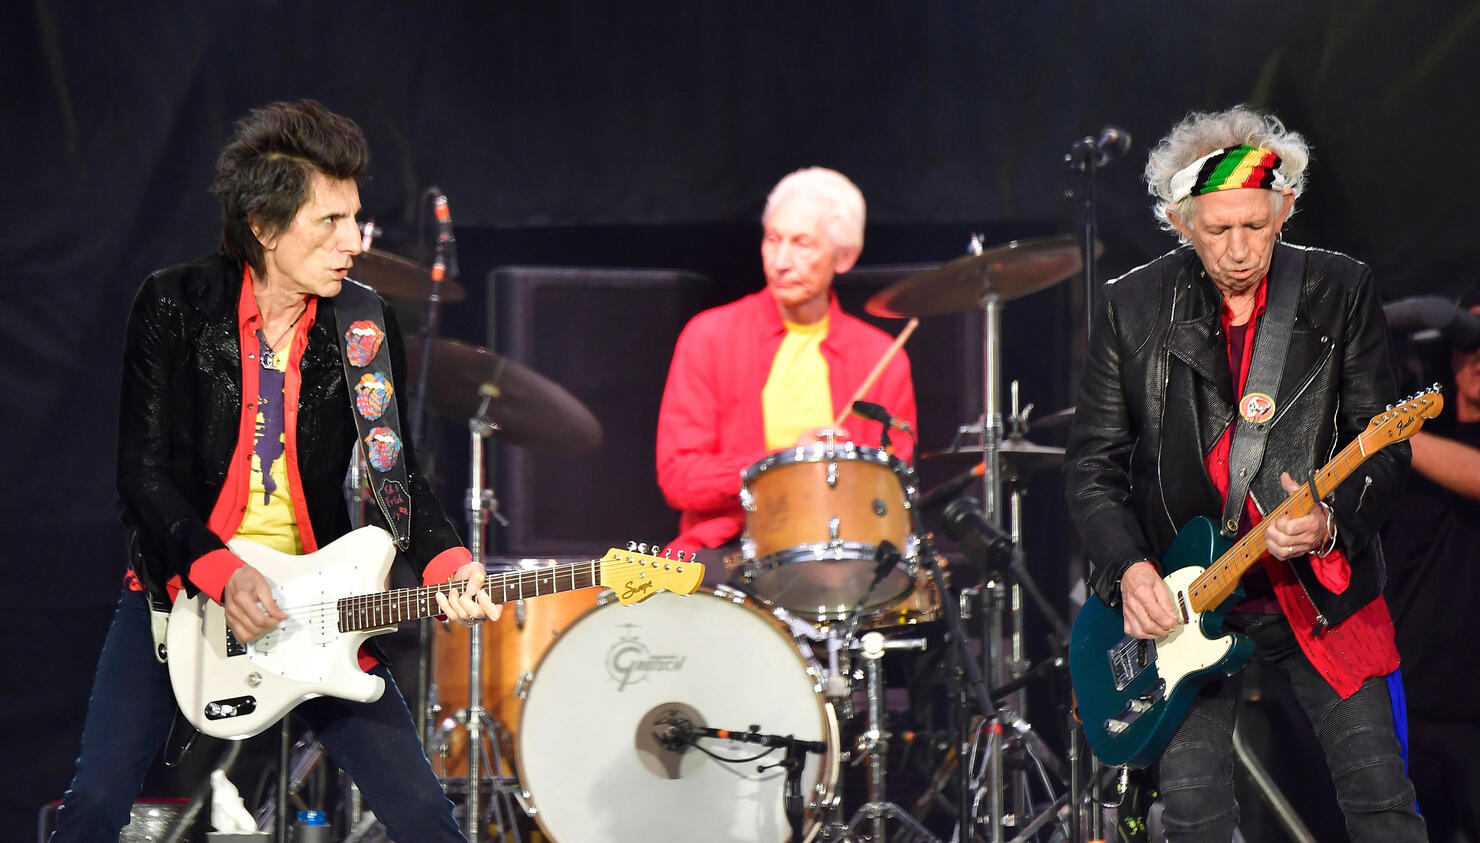 Rolling Stones' Manager Offers Opinion on the Band's Longevity